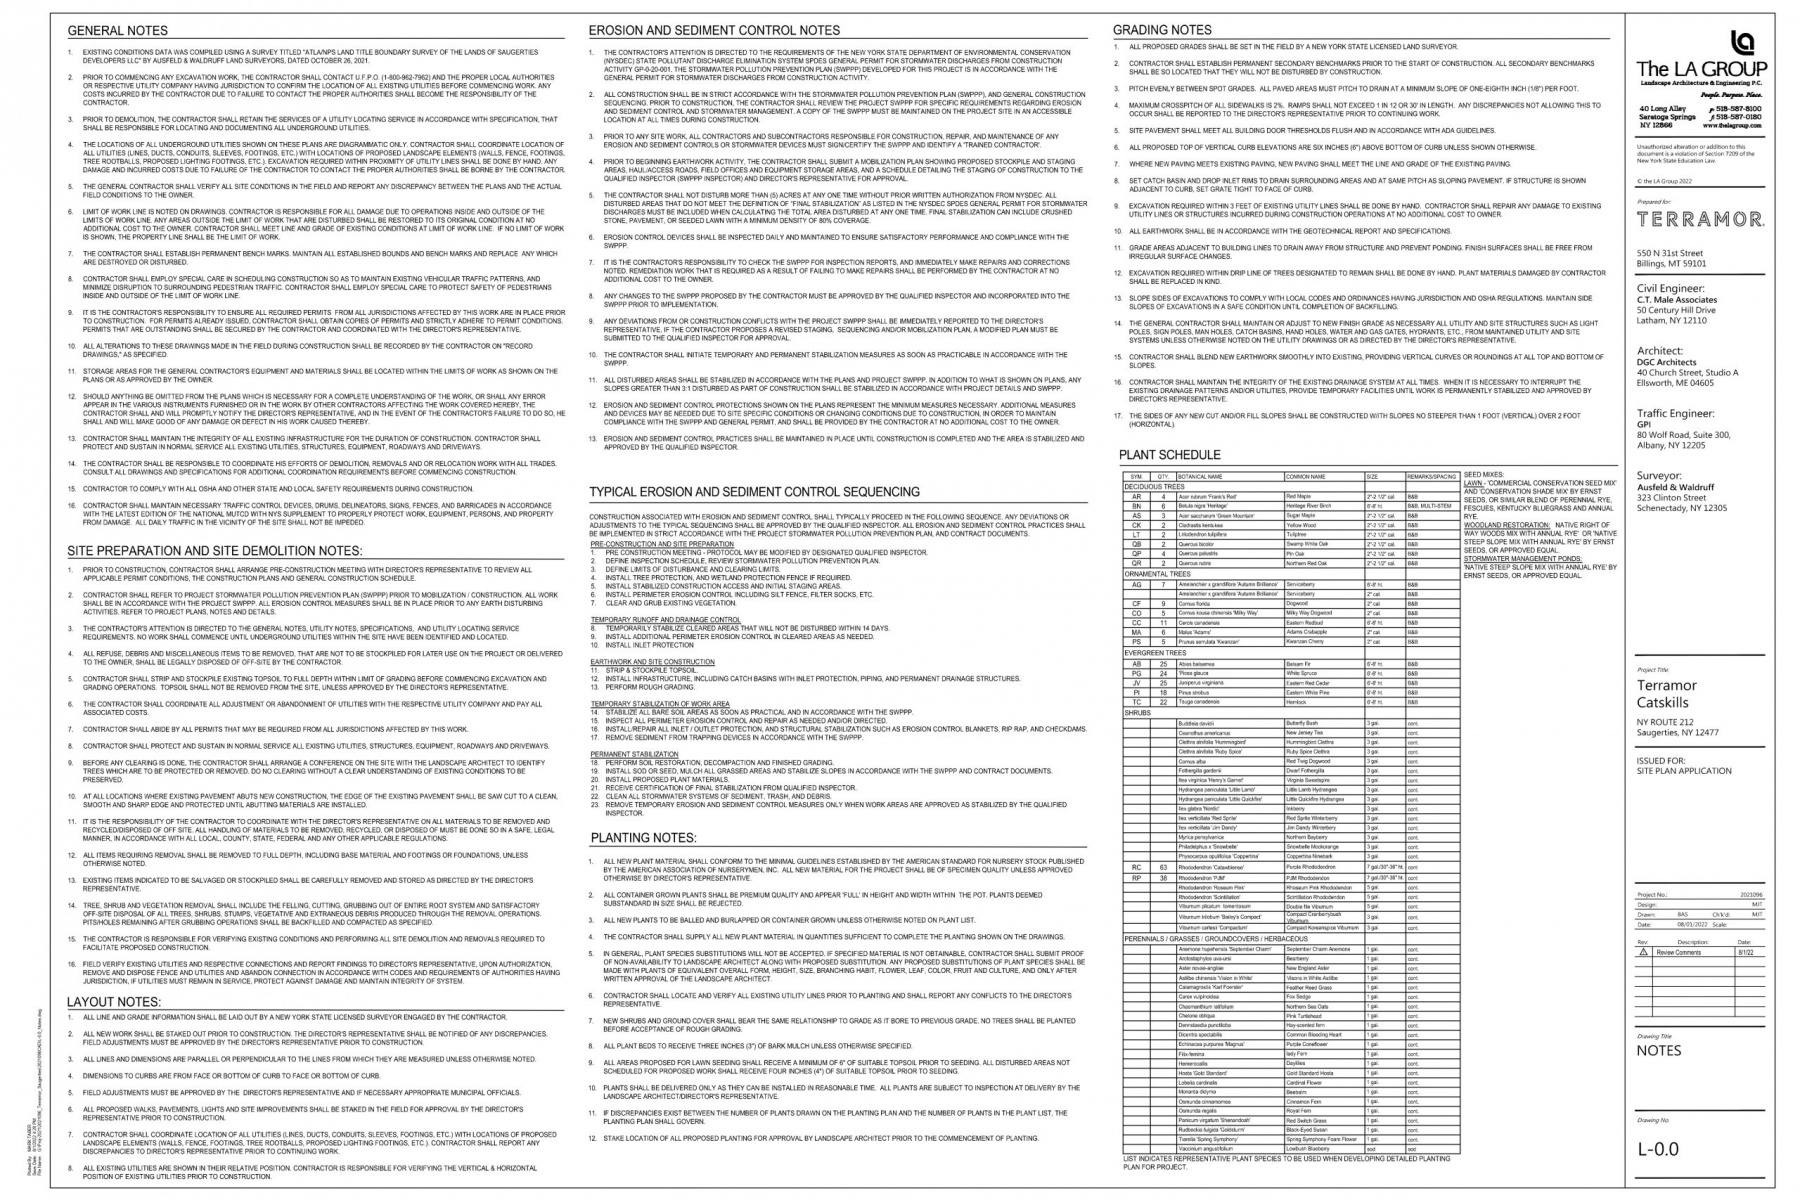 Terramor-Revised-Plan-Sheets-08-01-2022_page-0001-scaled